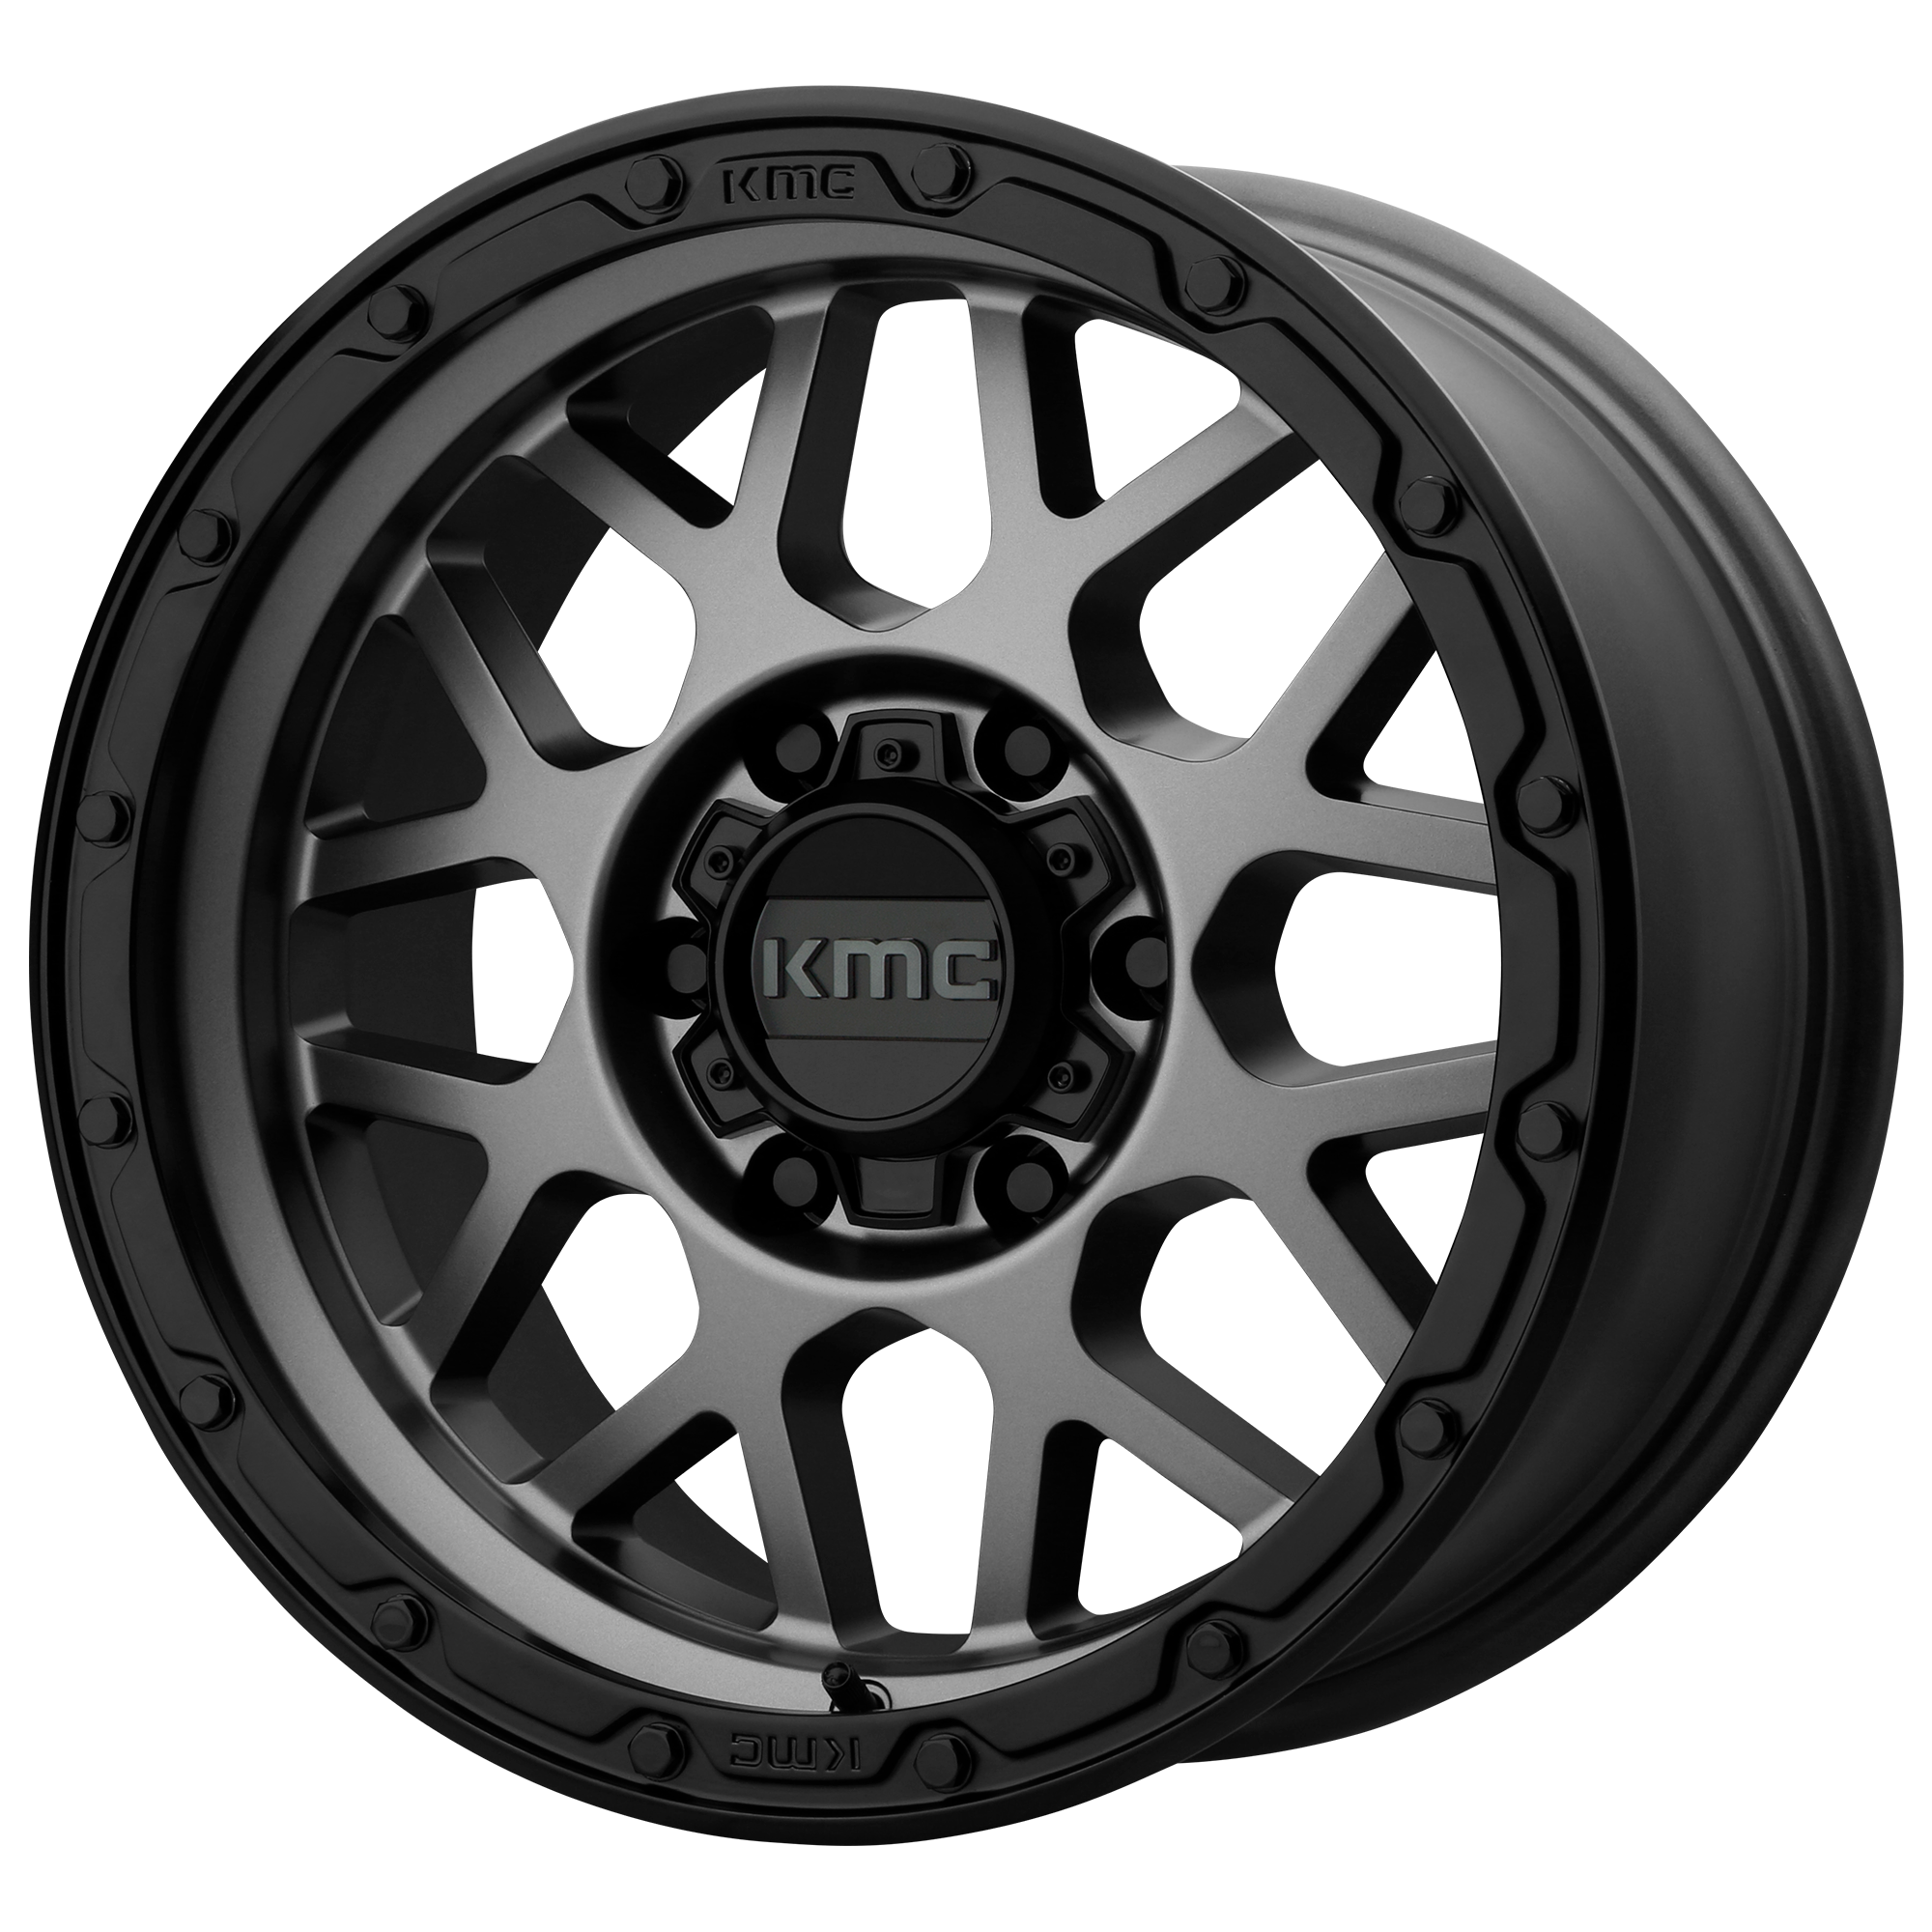 GRENADE OFF-ROAD 17x9 6x139.70 MATTE GRAY W/ MATTE BLACK LIP (-12 mm) - Tires and Engine Performance